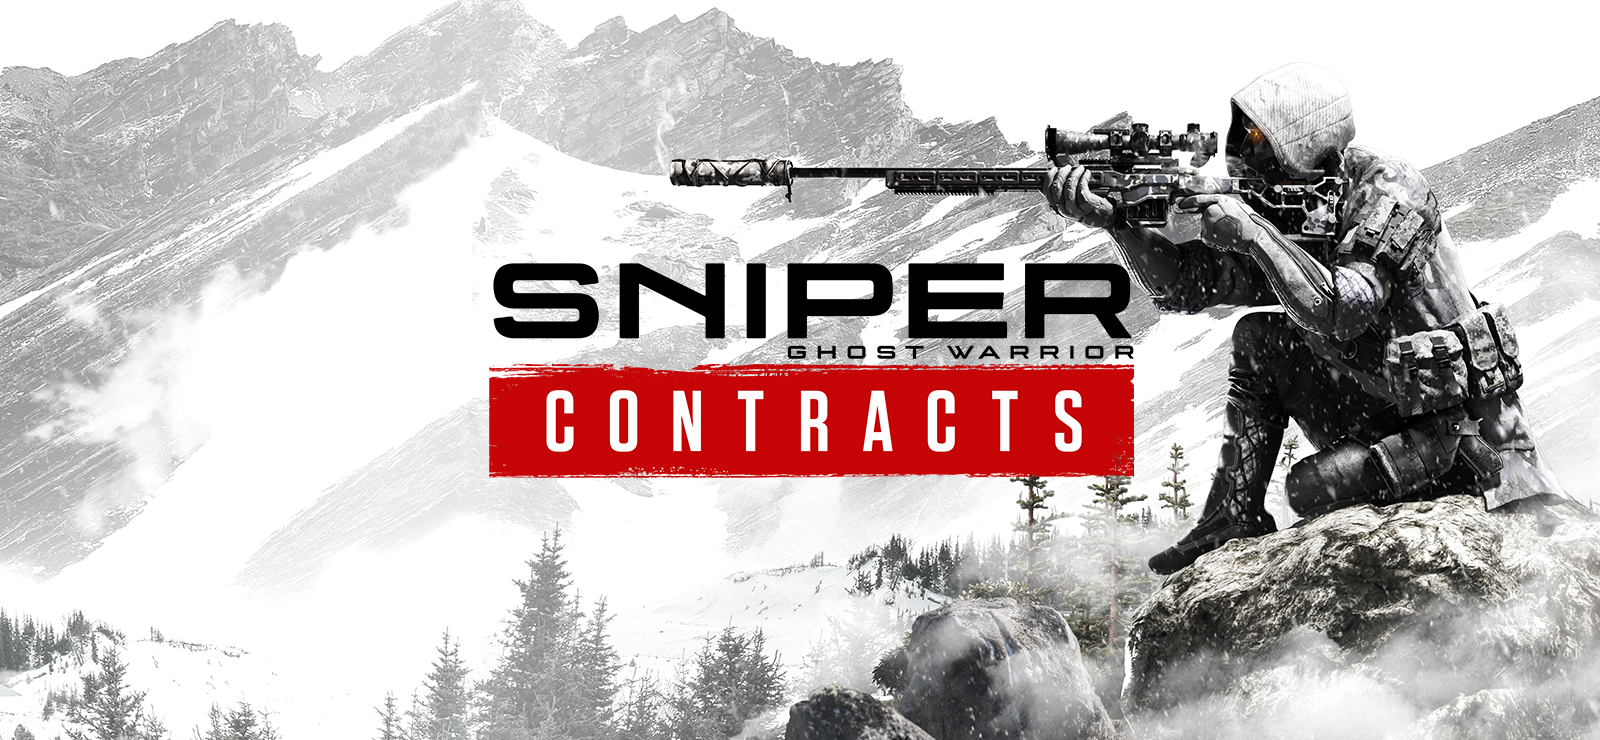 Sniper Ghost Warrior Contracts - SV - AMUR